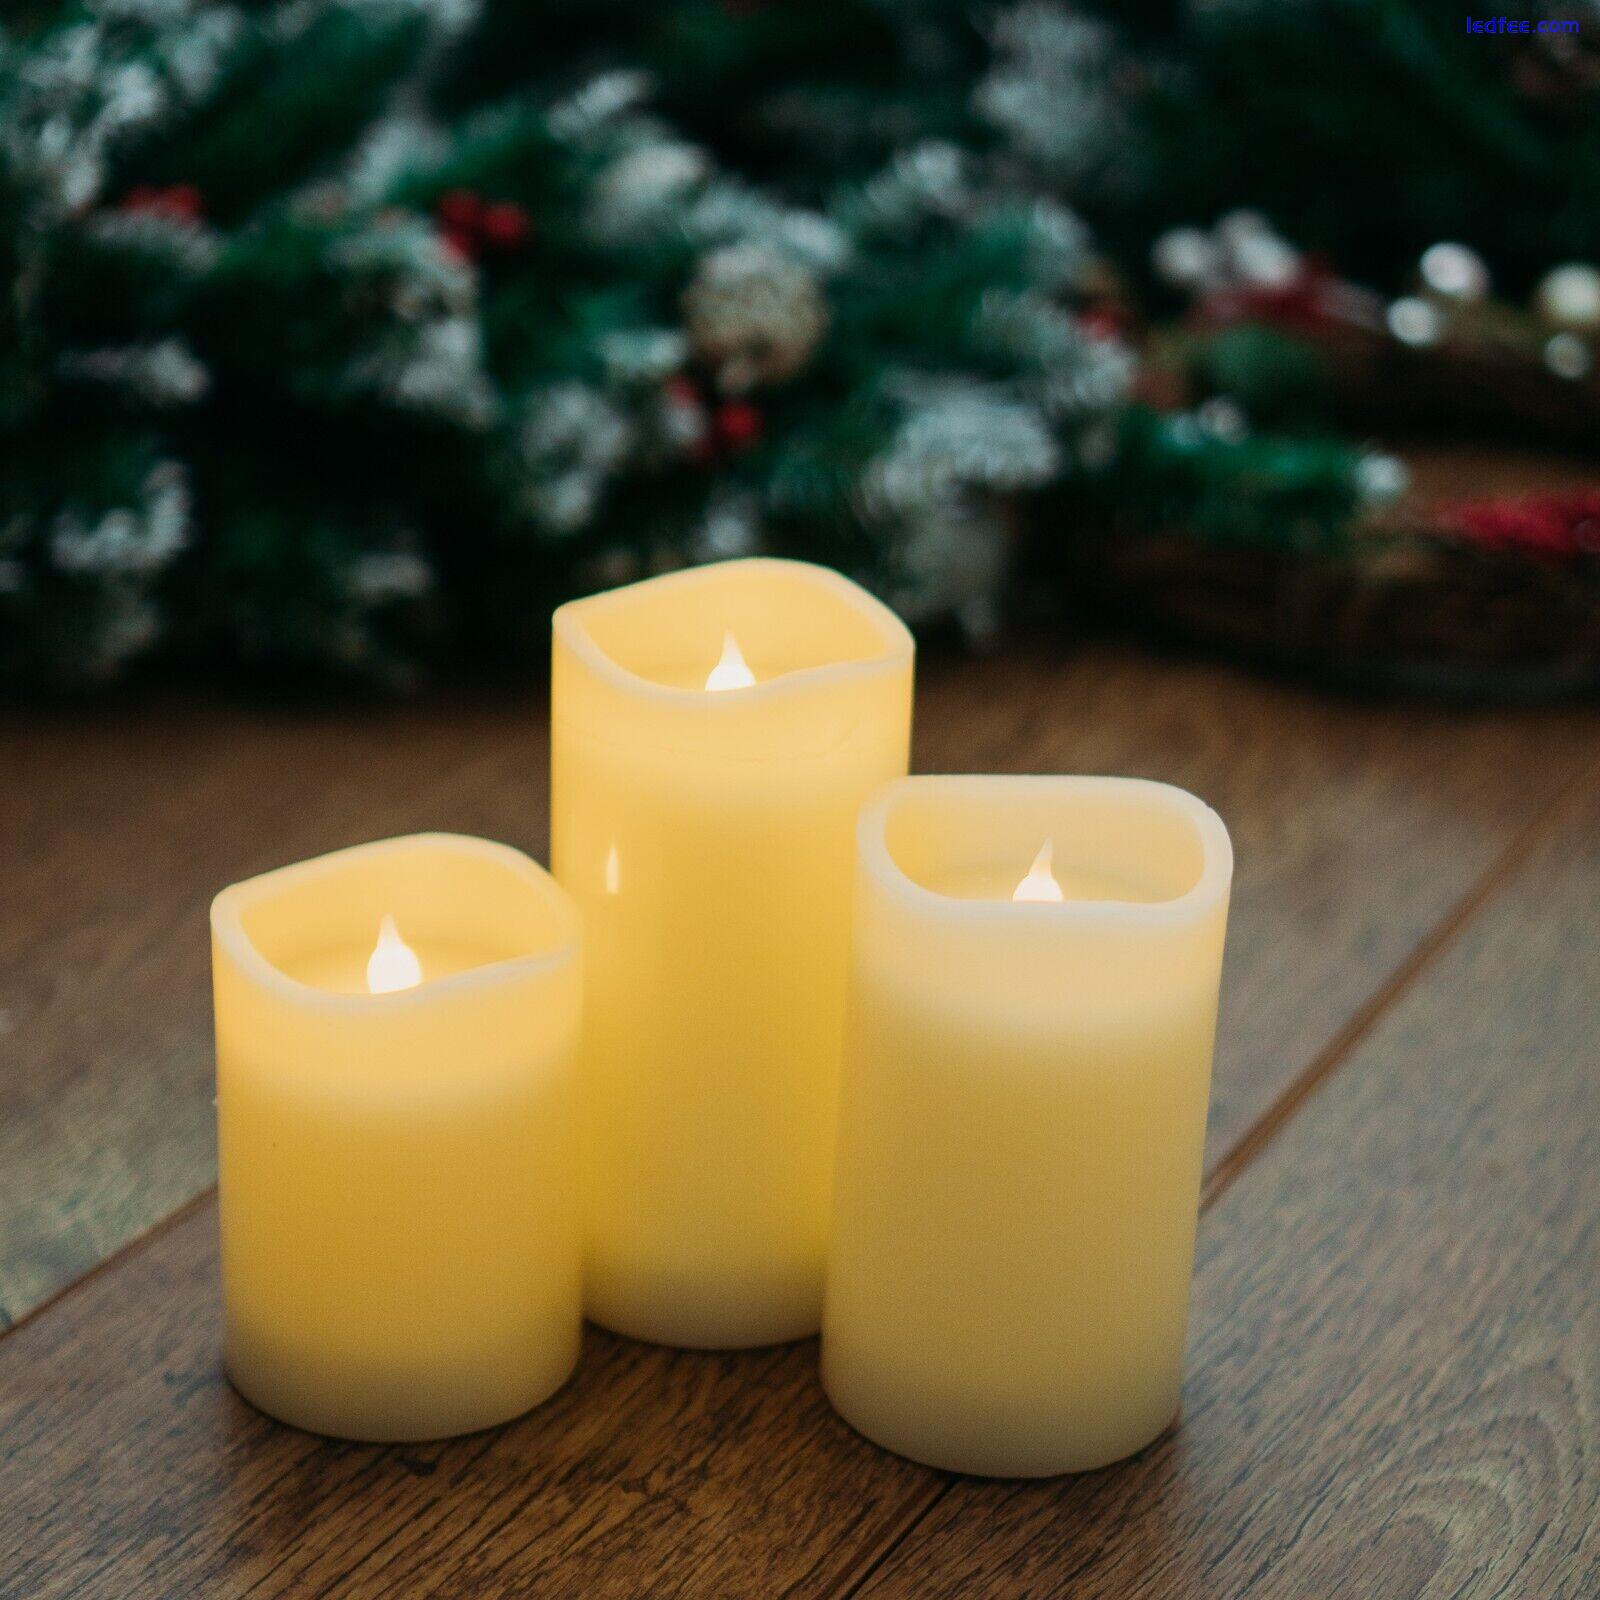 3-Piece Flameless Pillar Candle Set – Flickering LED Candles - Battery Operated 2 